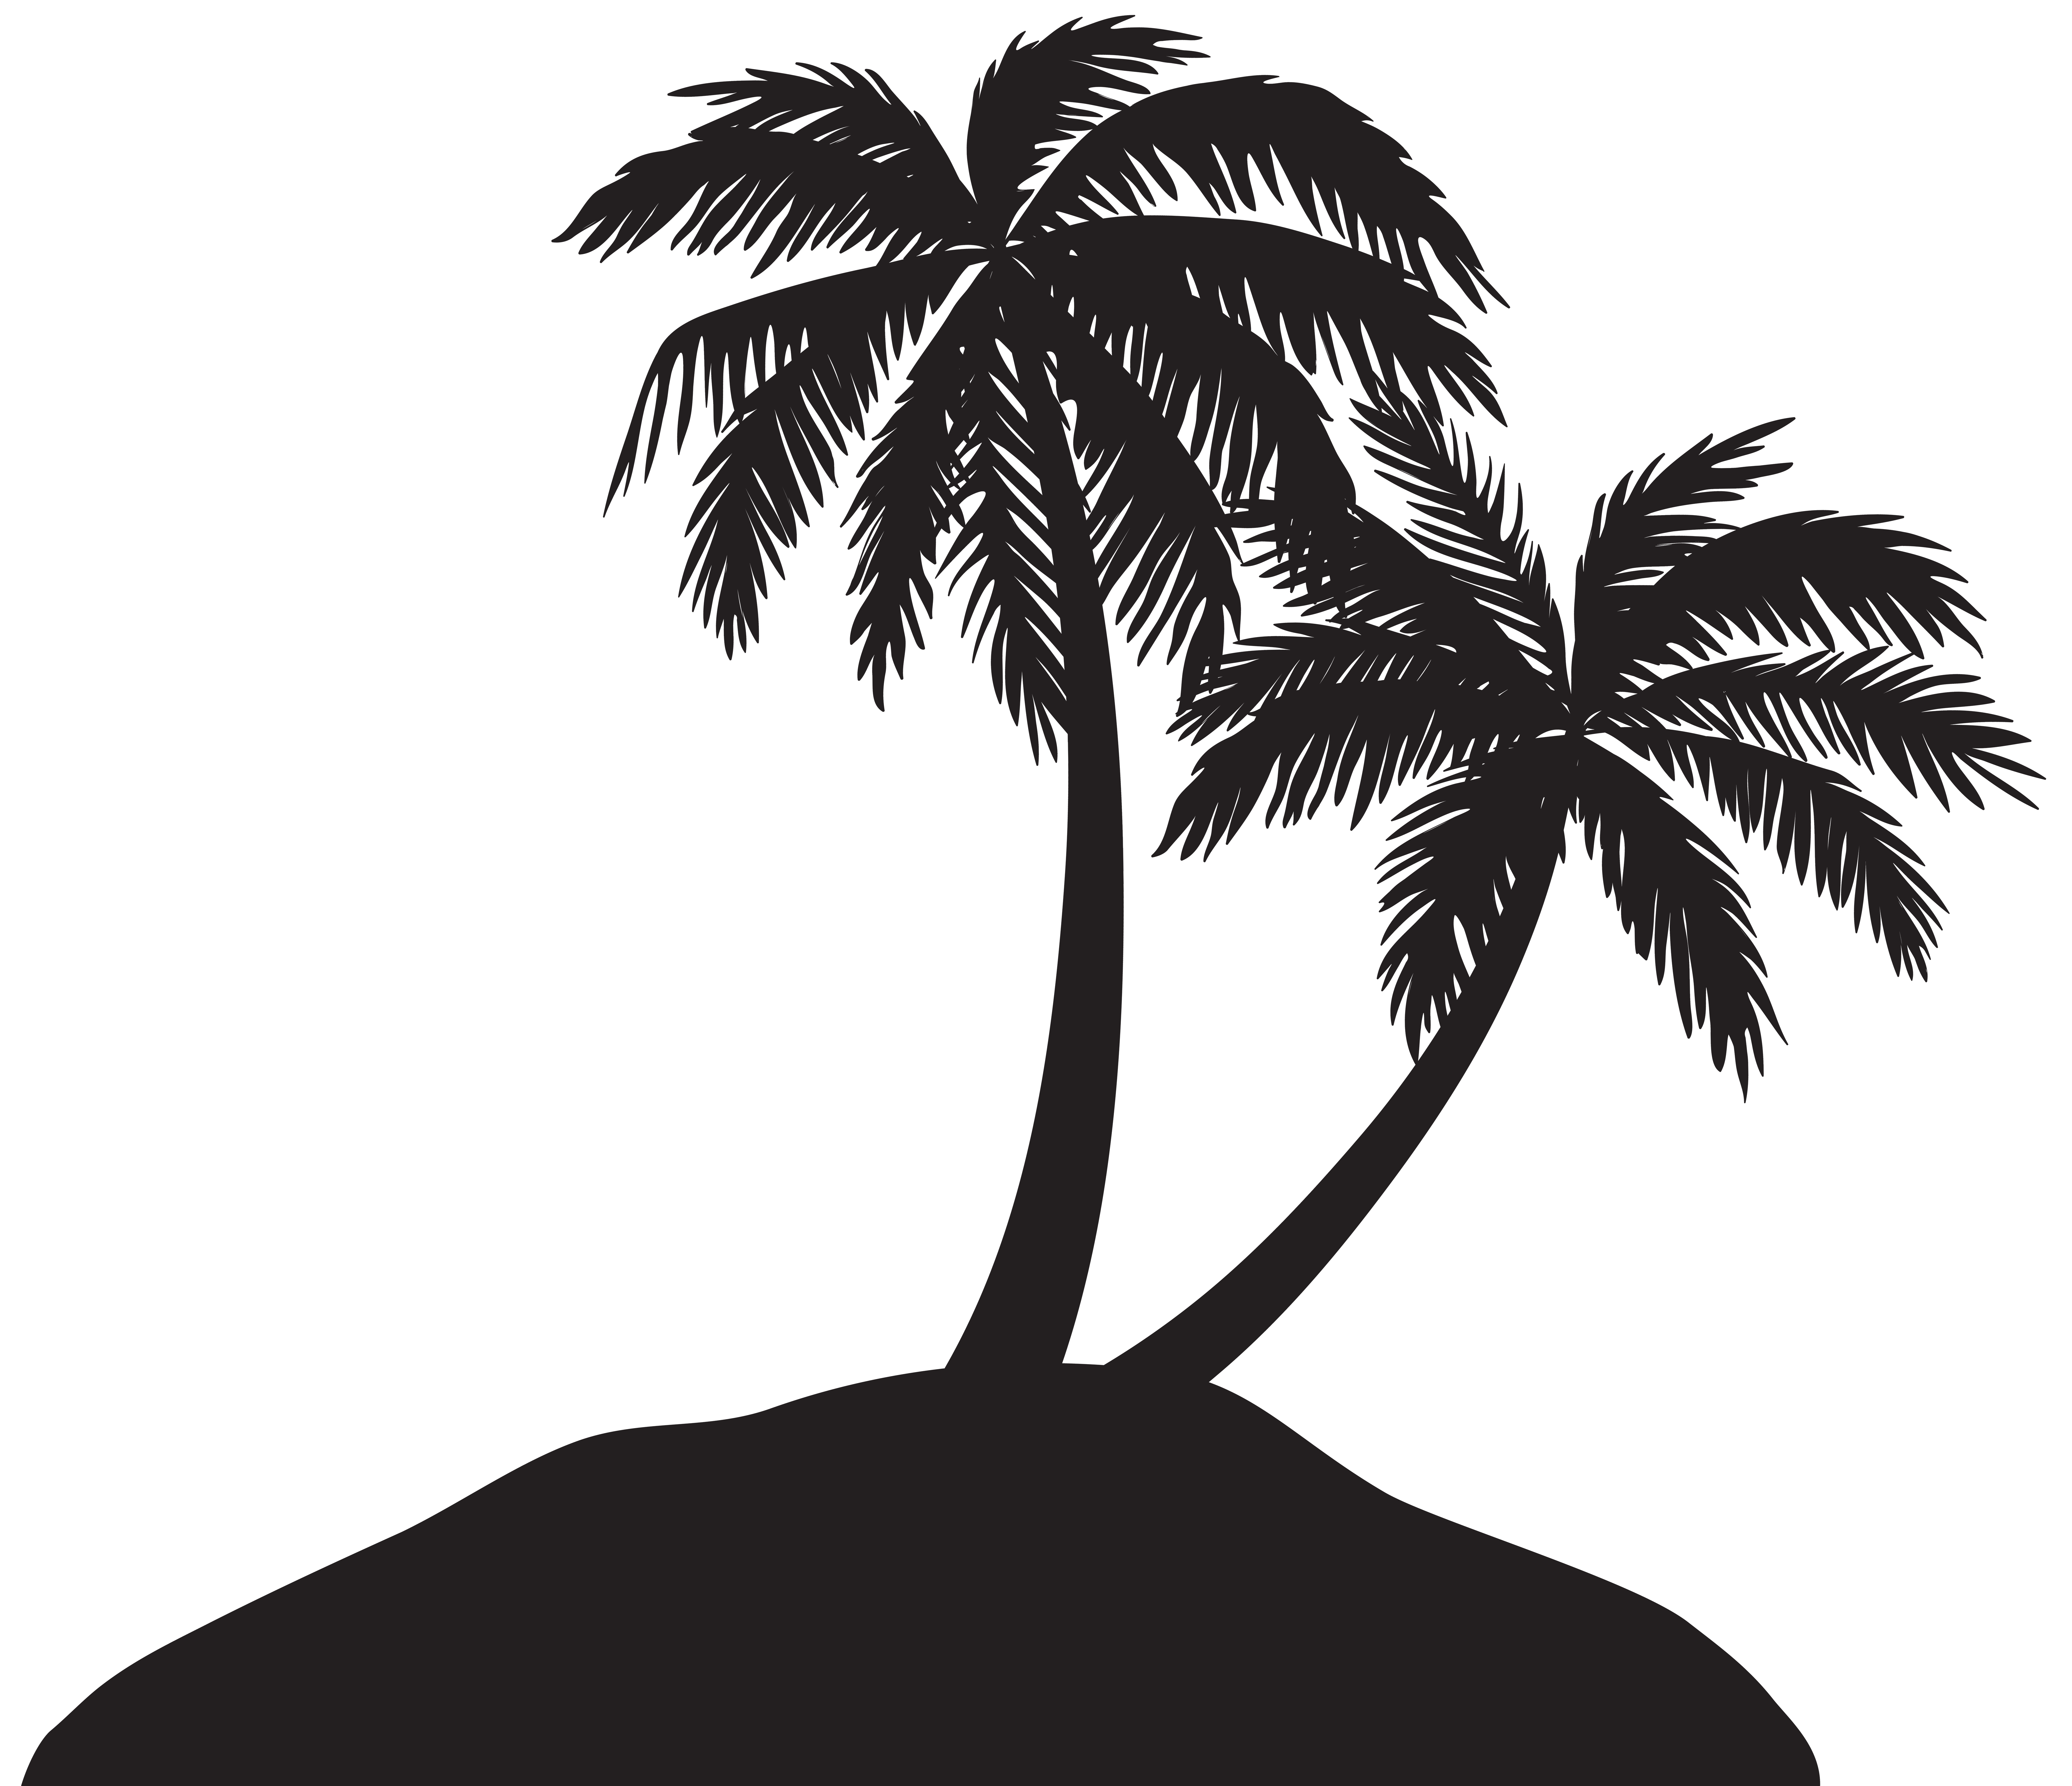 Island with trees silhouette. Palm clipart royalty free